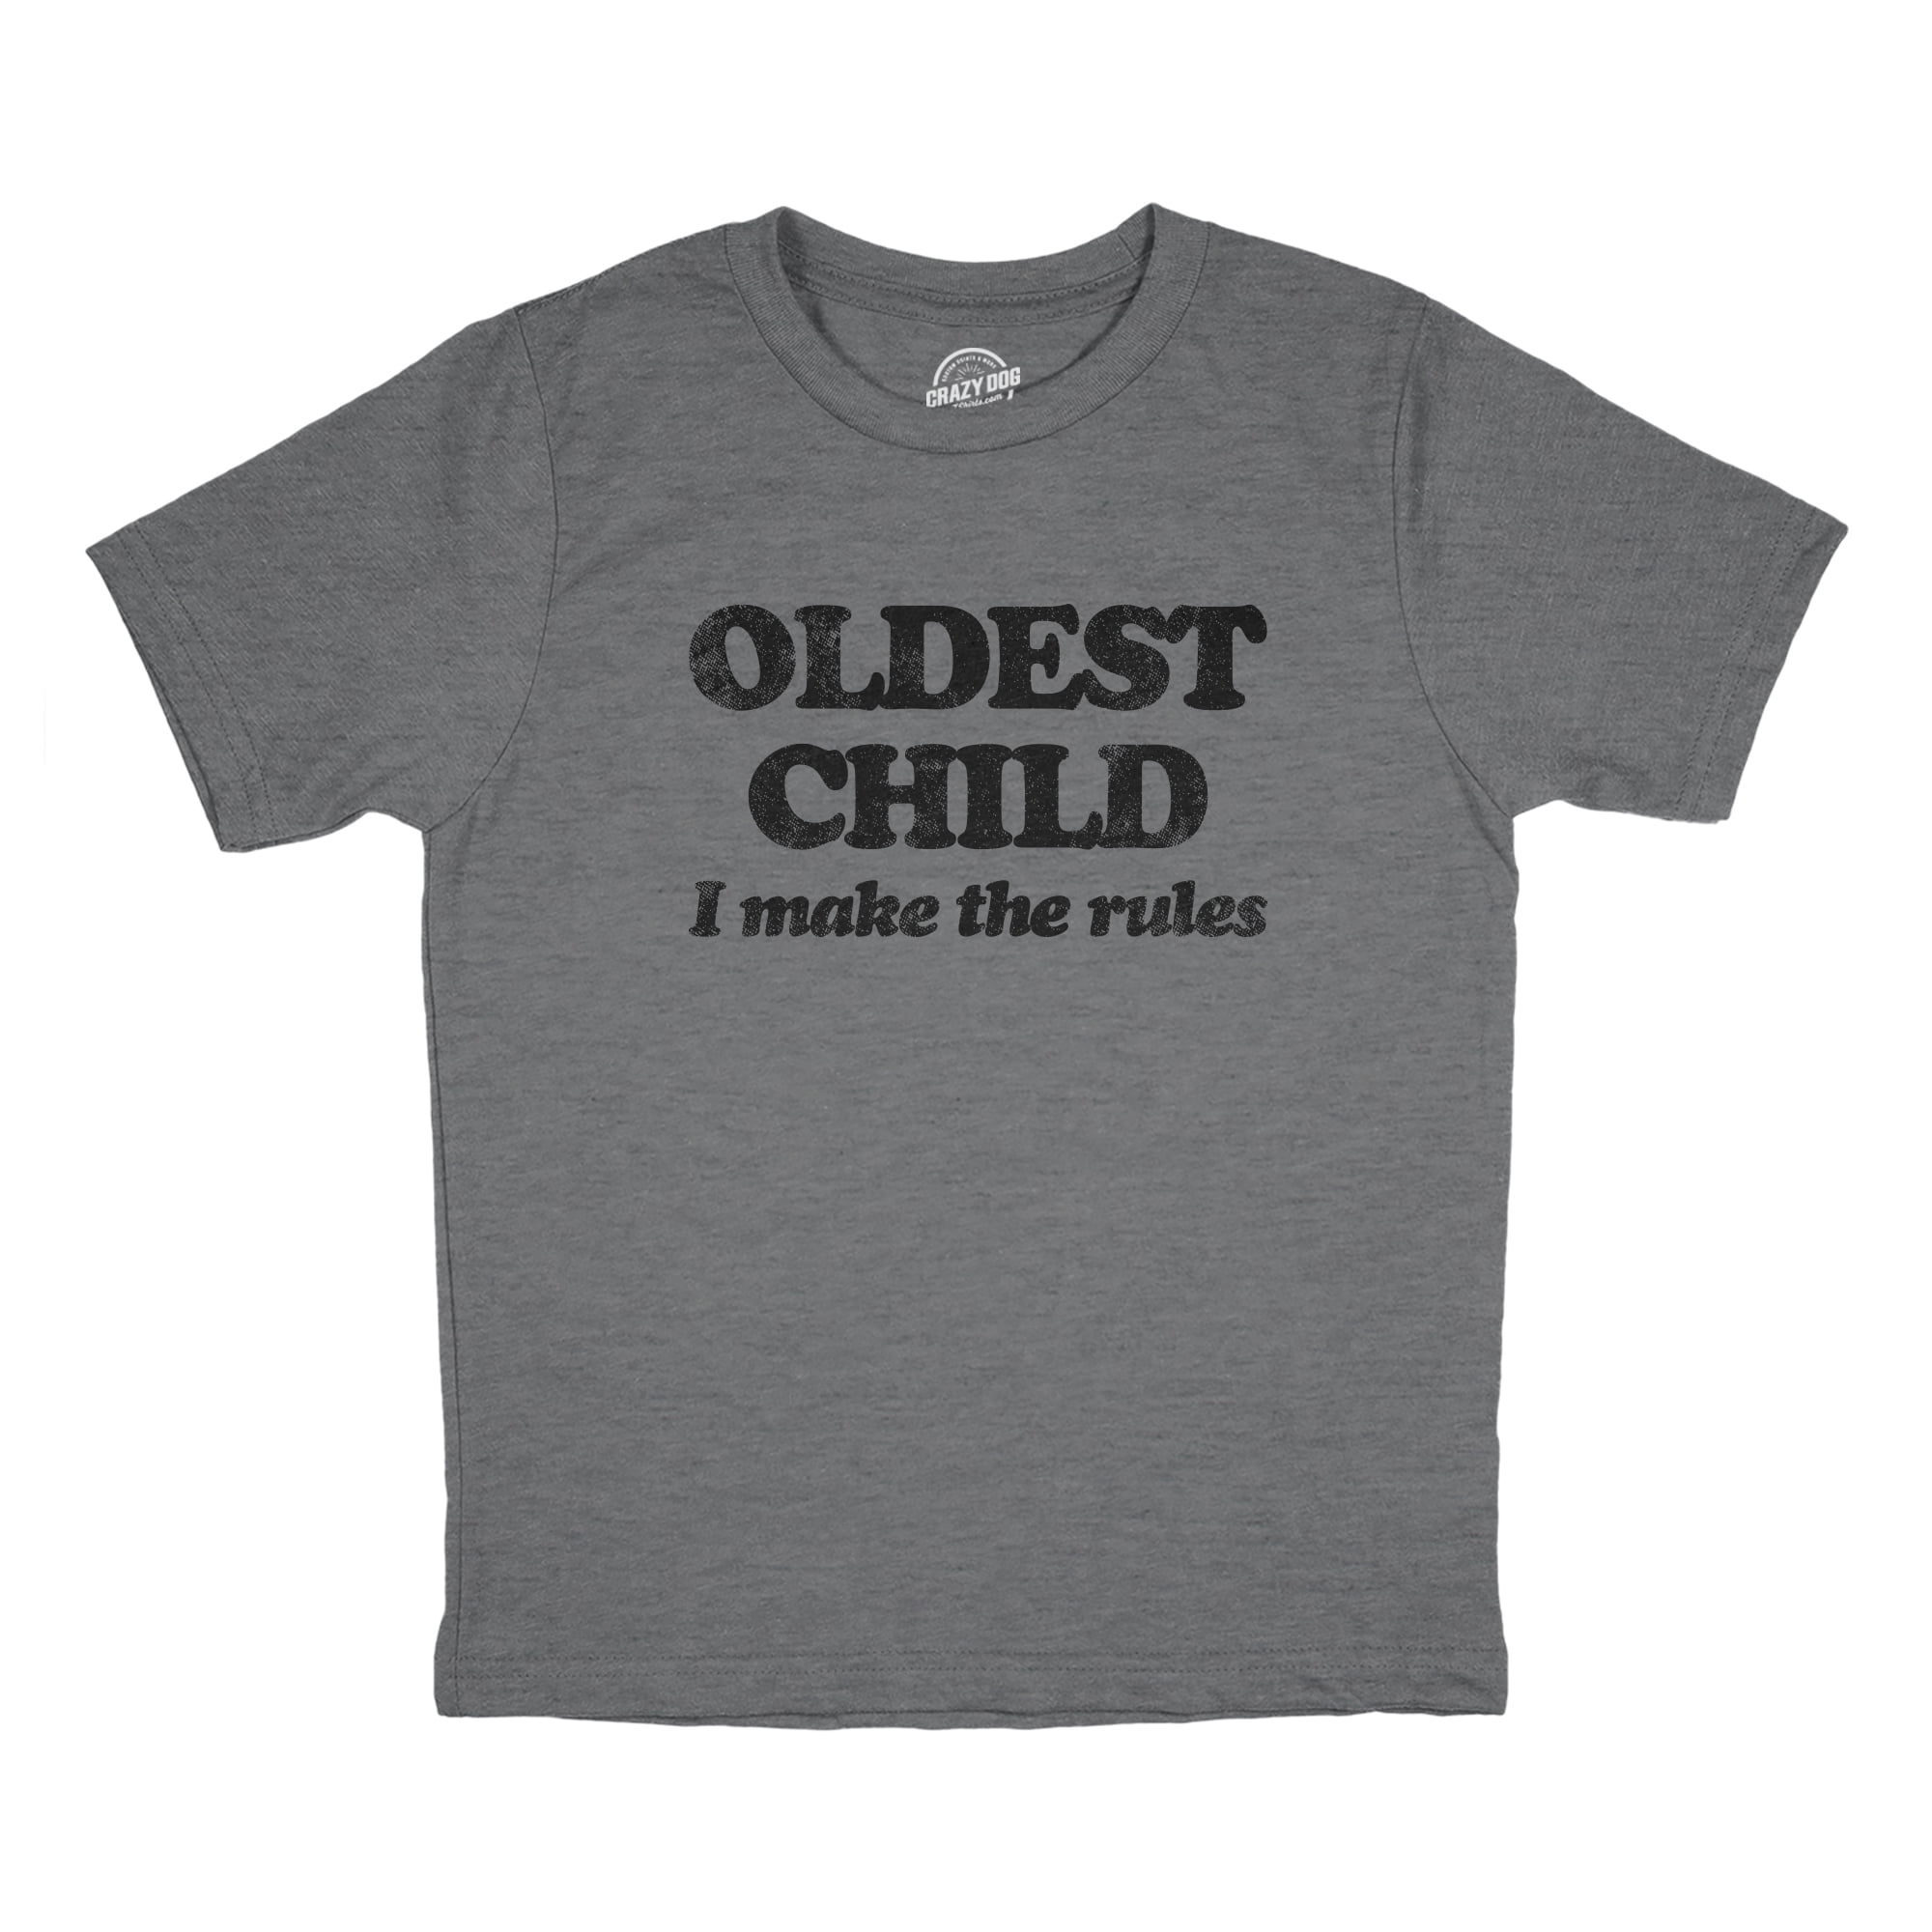 Oldest Child 2 Make The Rules Funny Novelty Tops T-Shirt Womens tee TShirt 